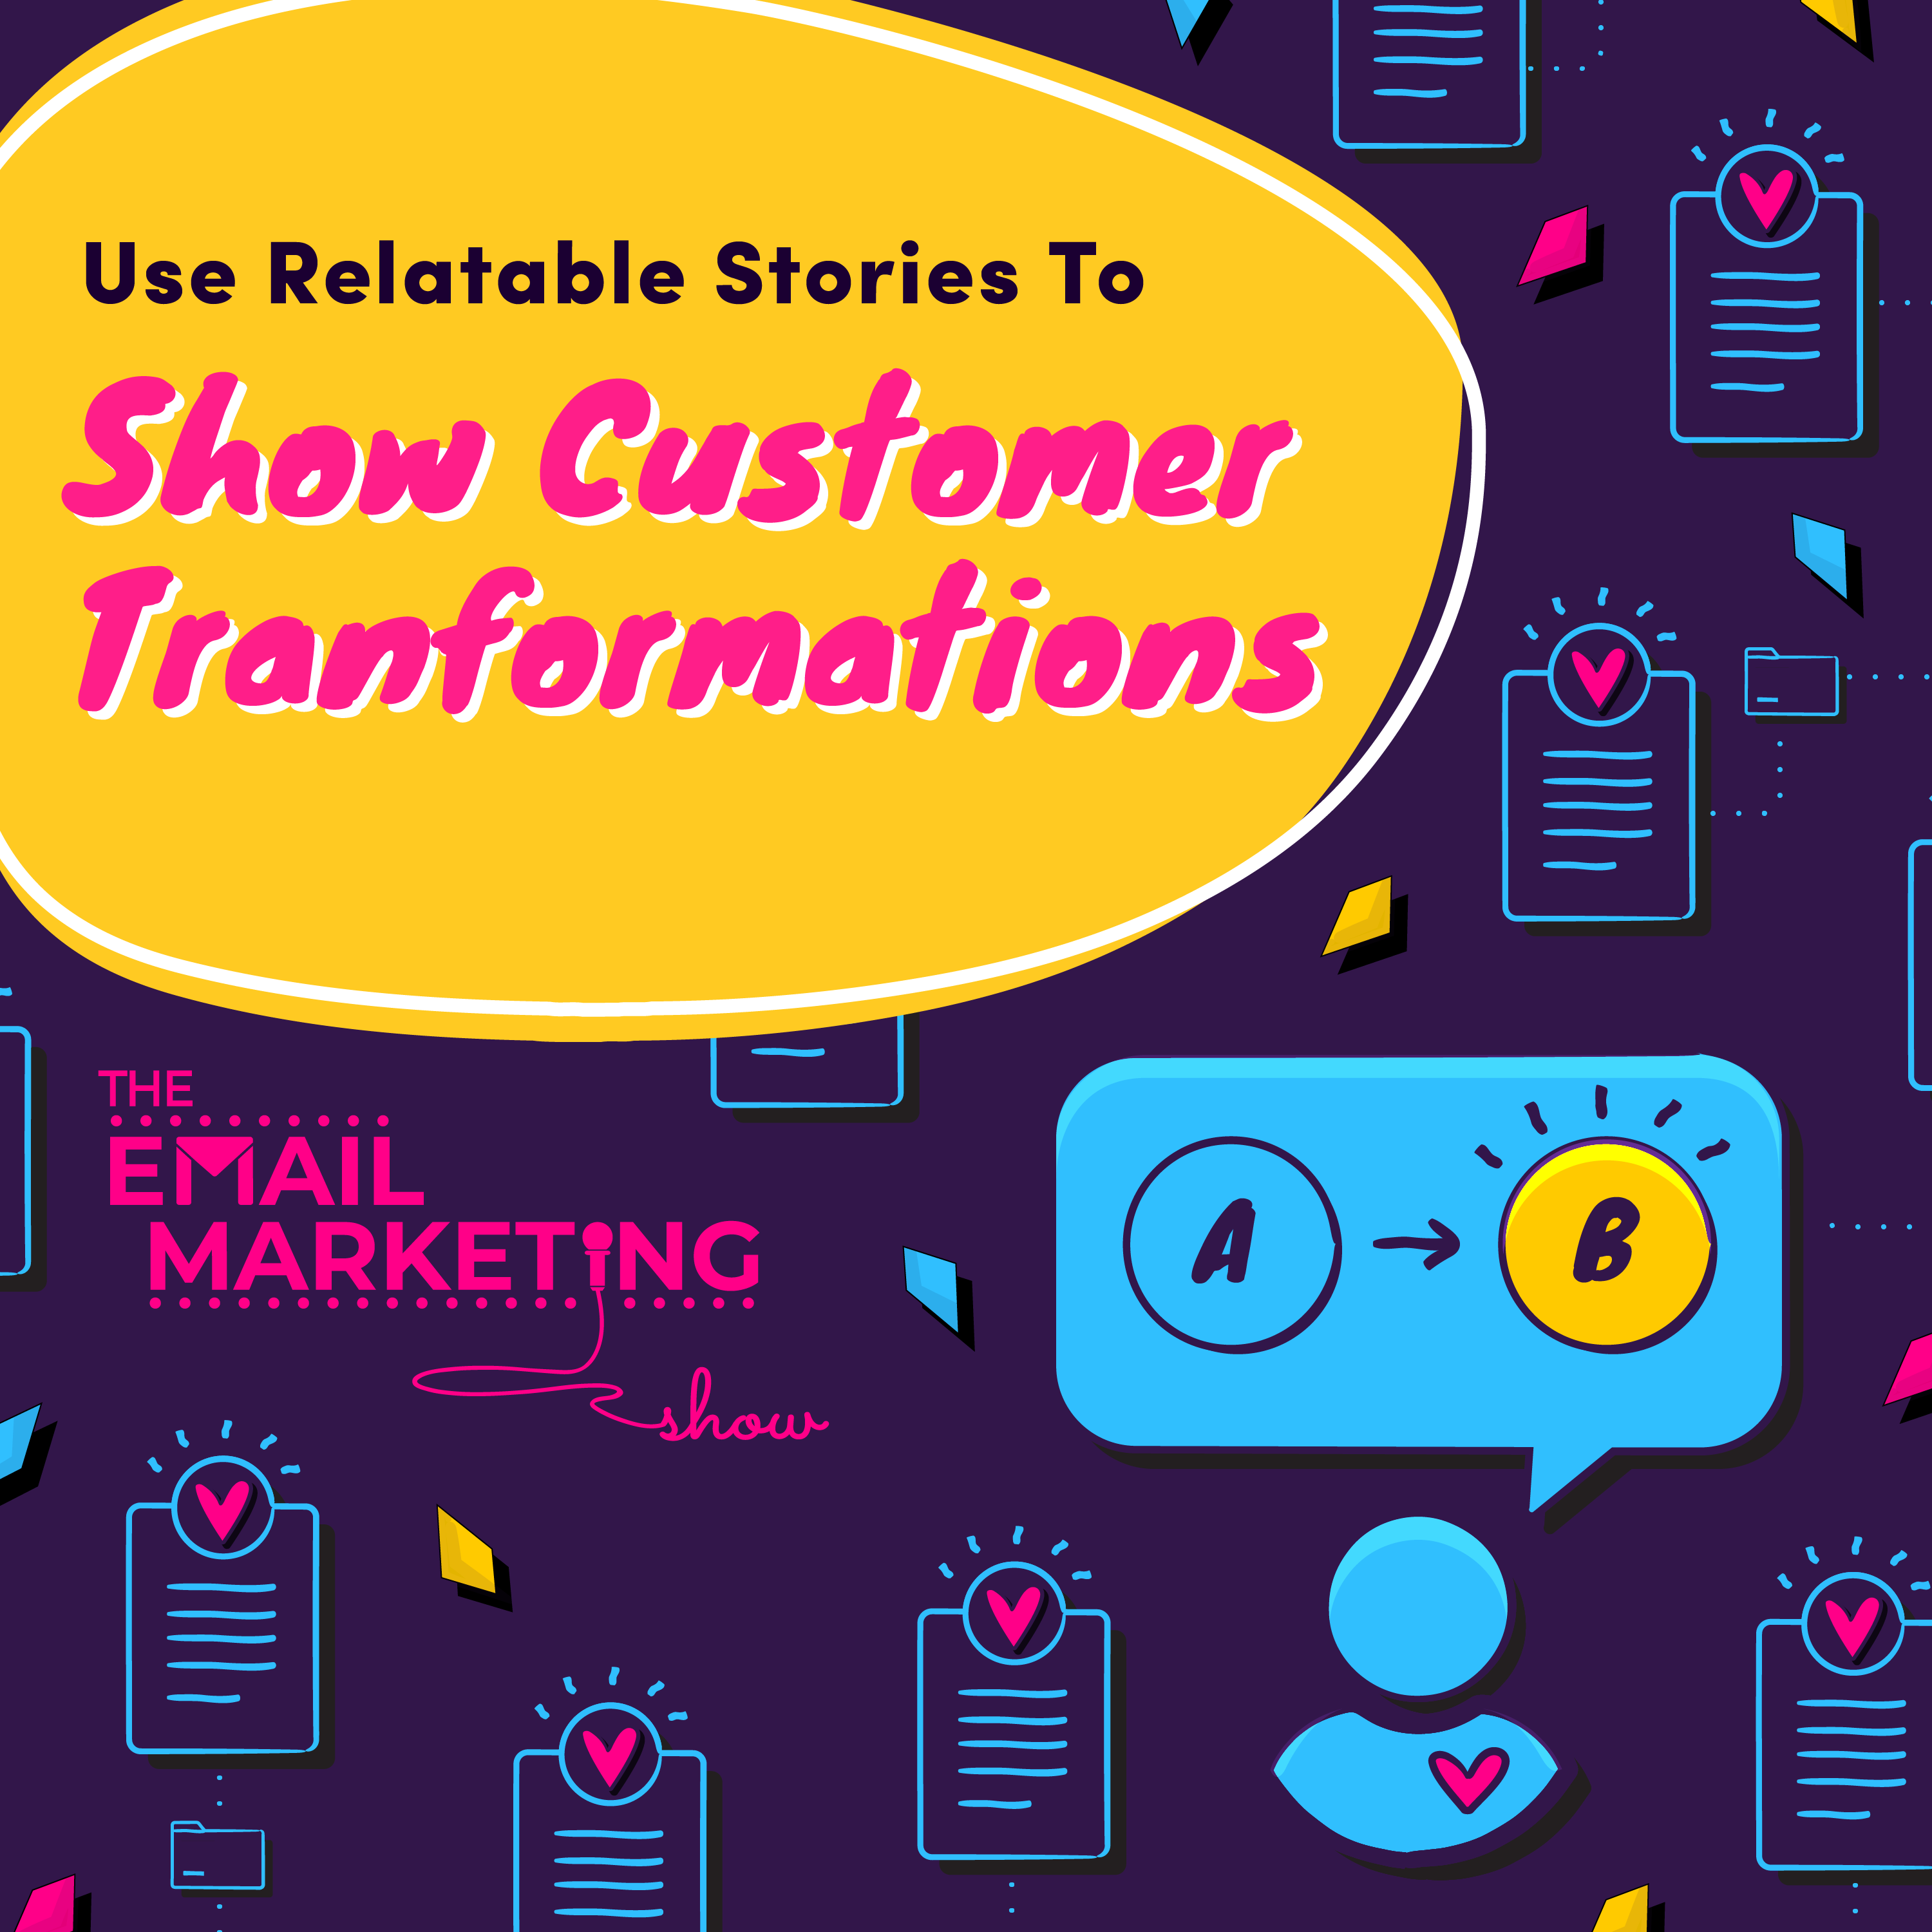 How To Show Customer Transformations In Email Marketing